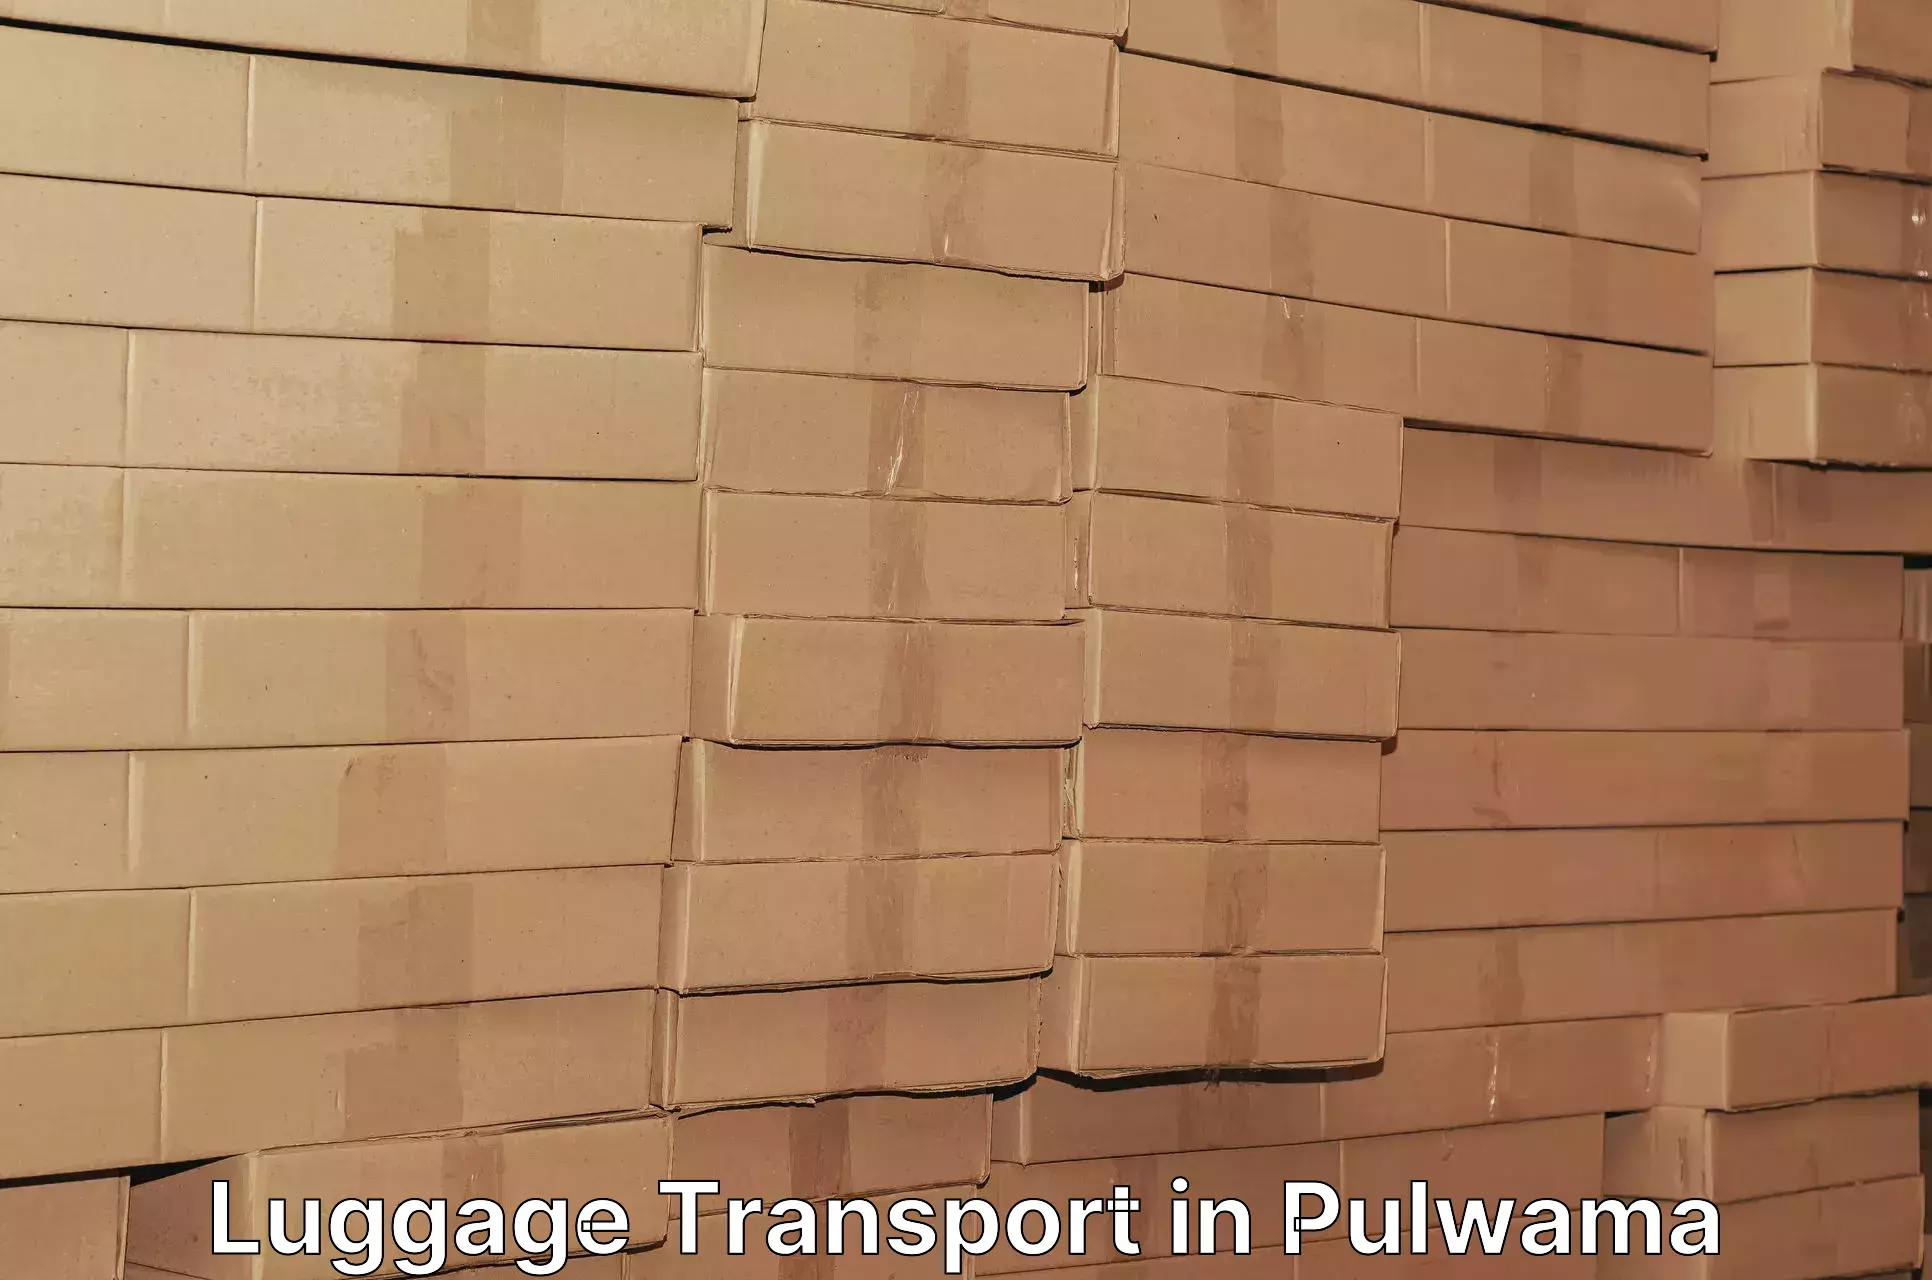 Luggage transport rates in Pulwama